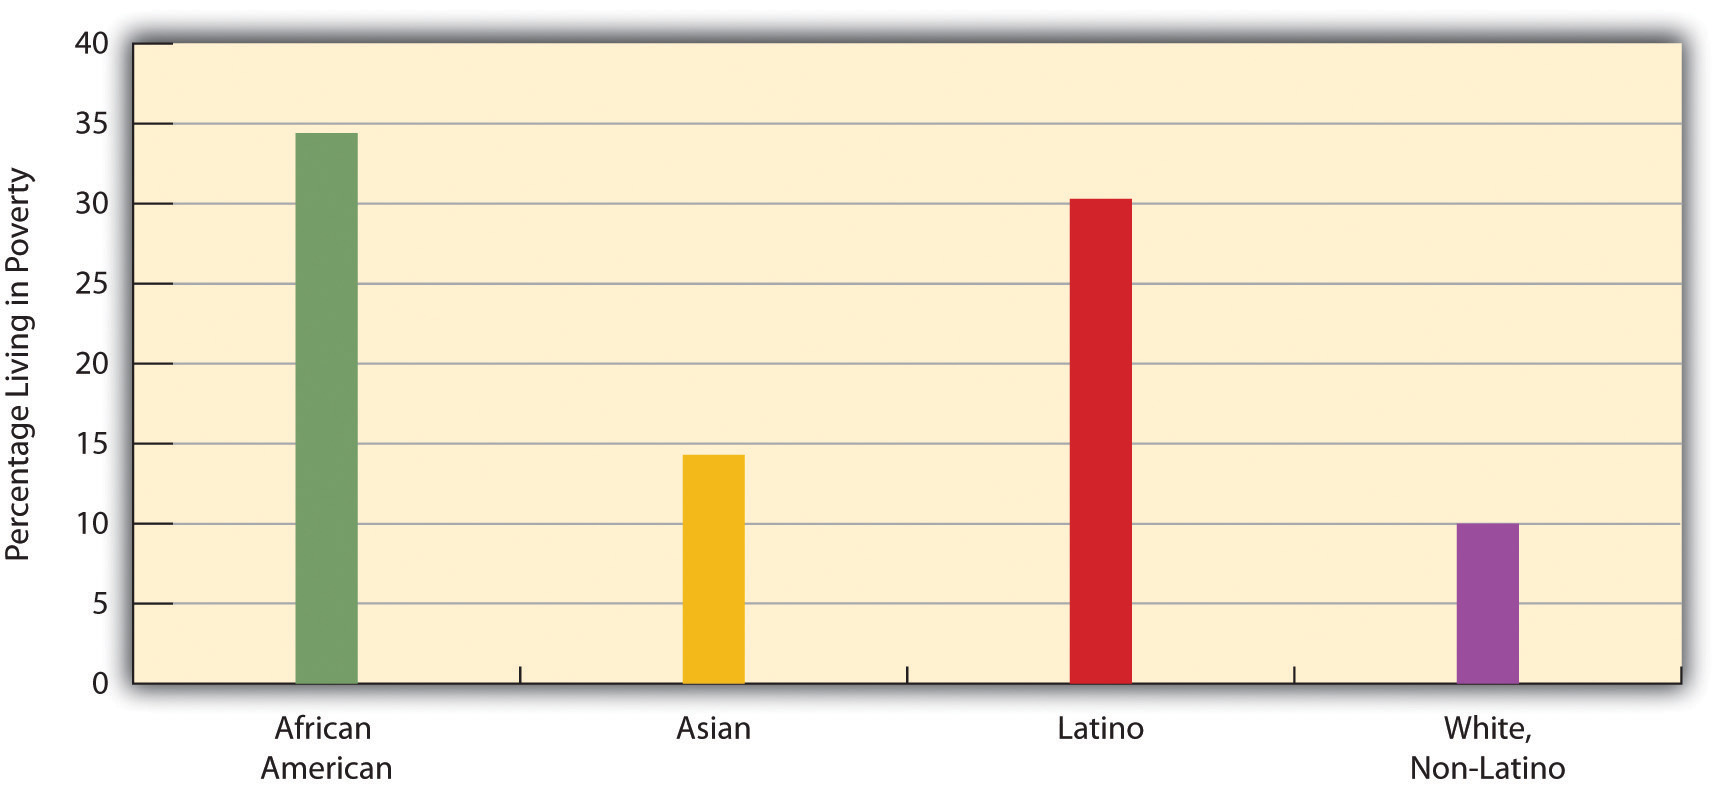 Race, Ethnicity, and Percentage of Children Below Poverty Level, 2008